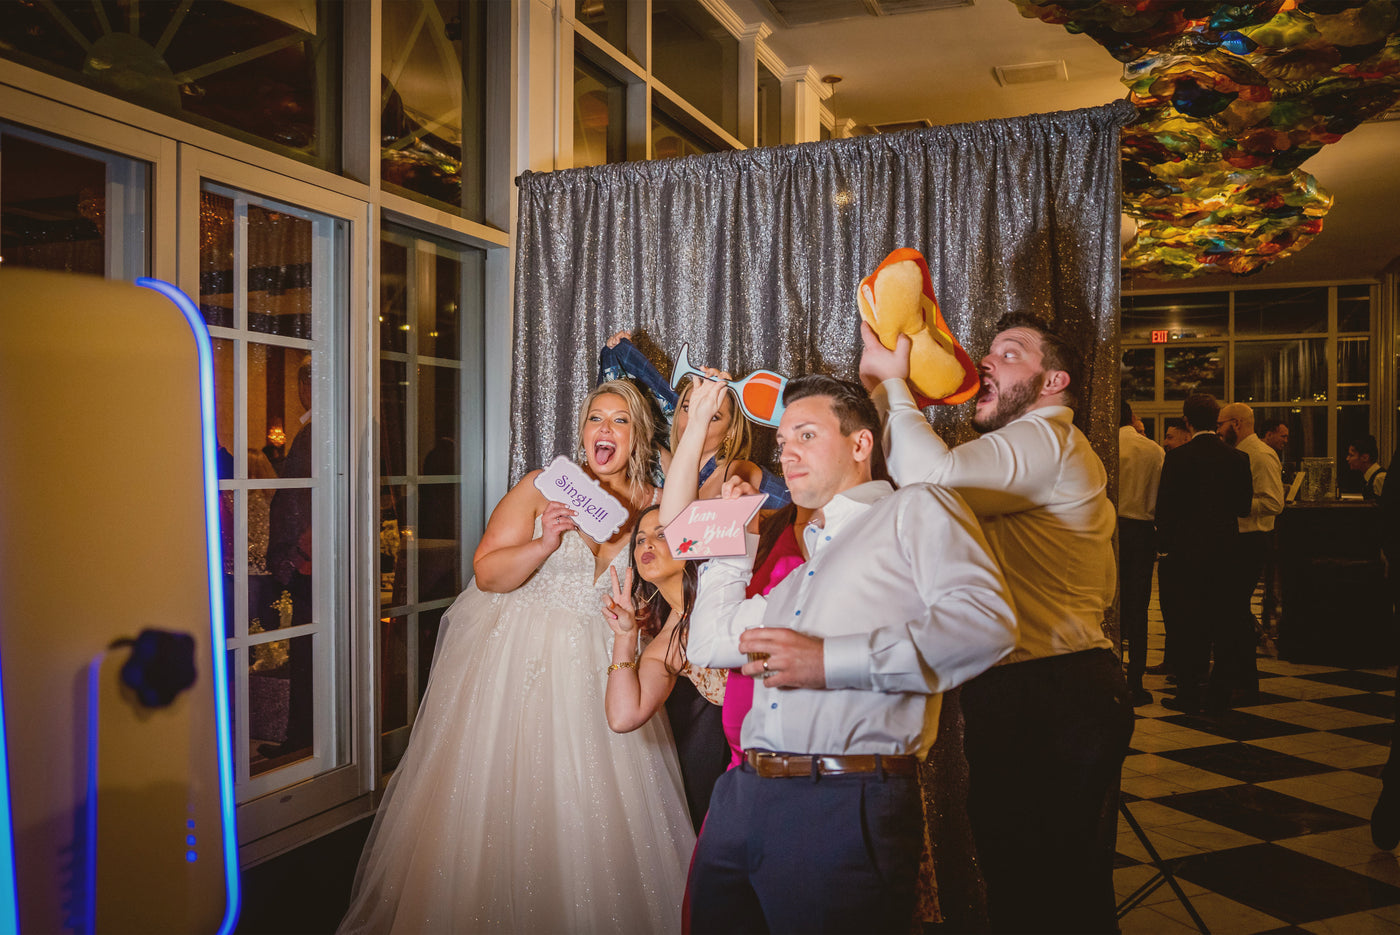 A bride and groom strike a funny pose with friends in a magic mirror style photo booth with a deluxe backdrop.